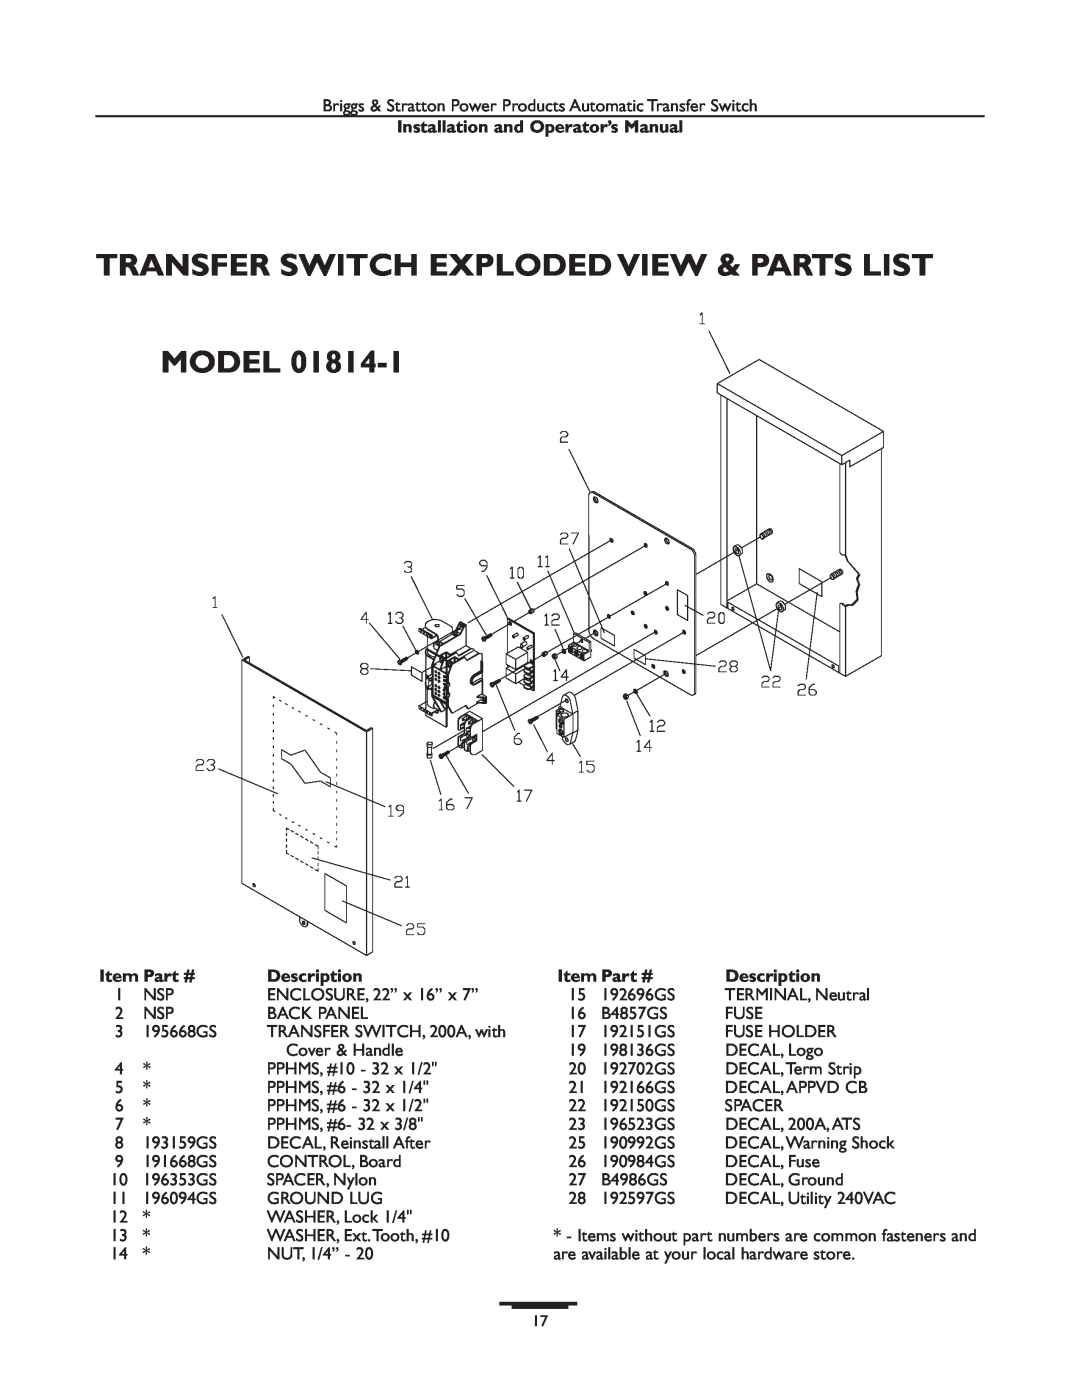 Briggs & Stratton 01814-1, 01928-1 Transfer Switch Exploded View & Parts List Model, Installation and Operator’s Manual 